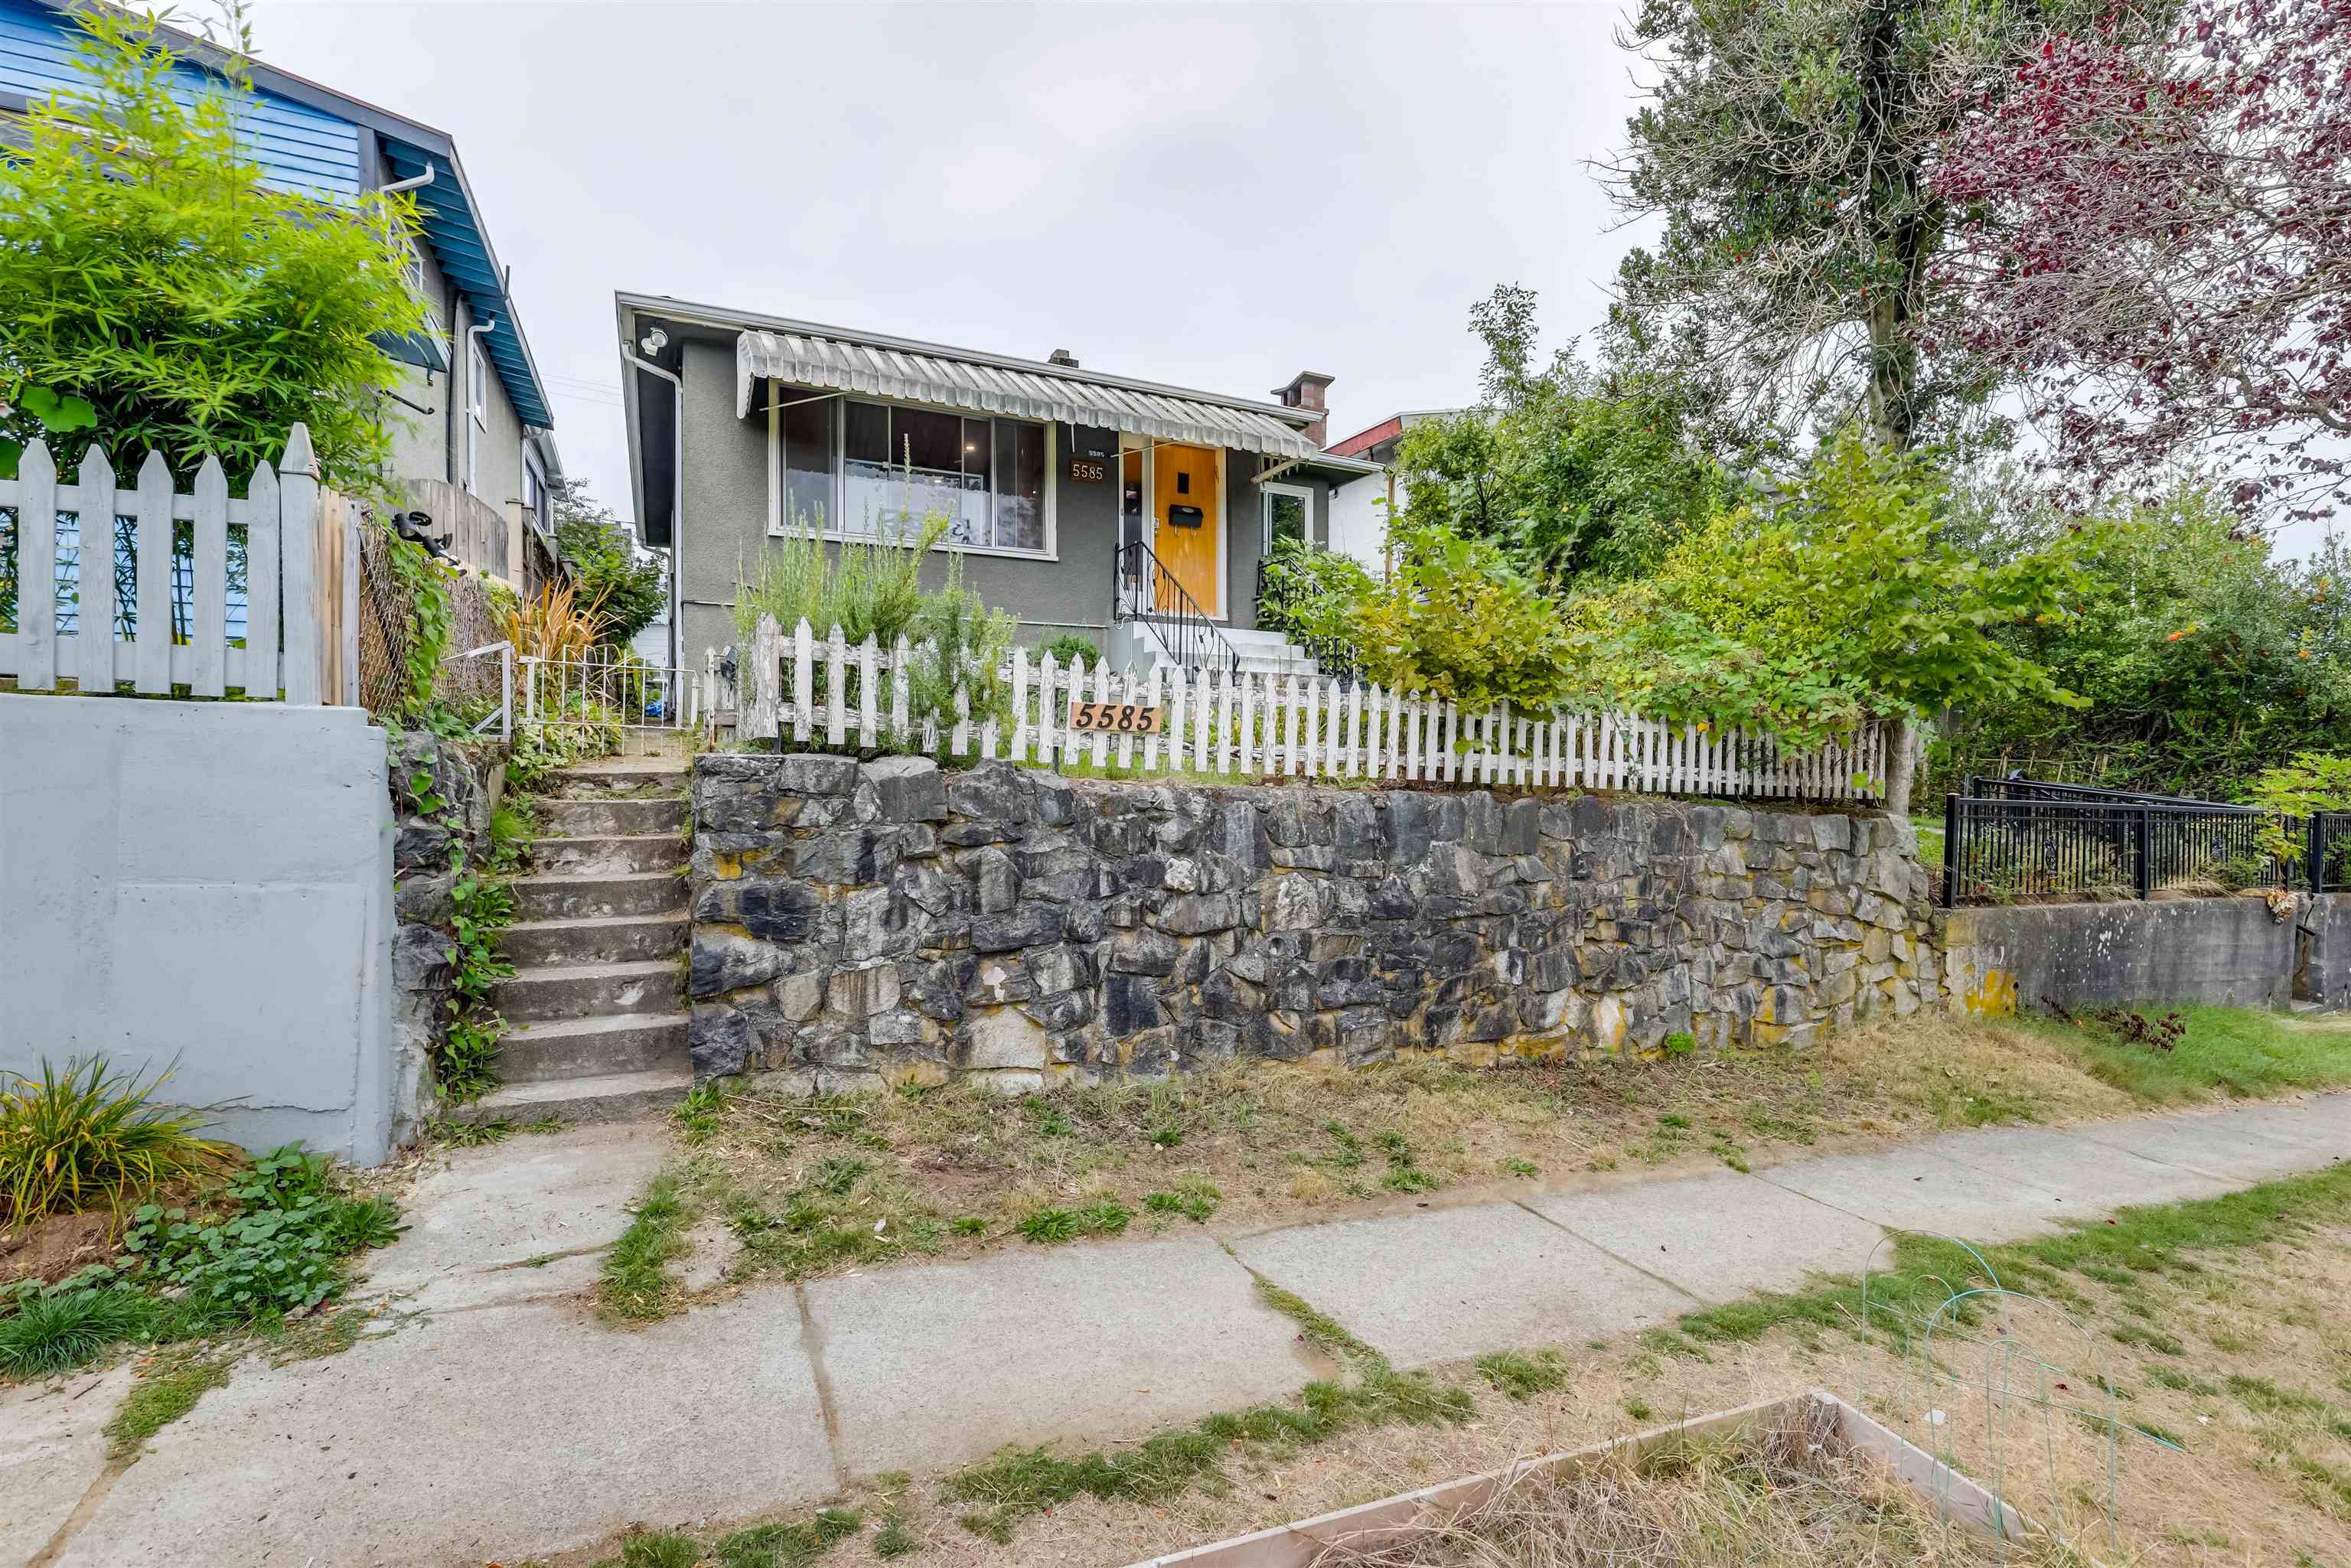 Listing image of 5585 CHESTER STREET